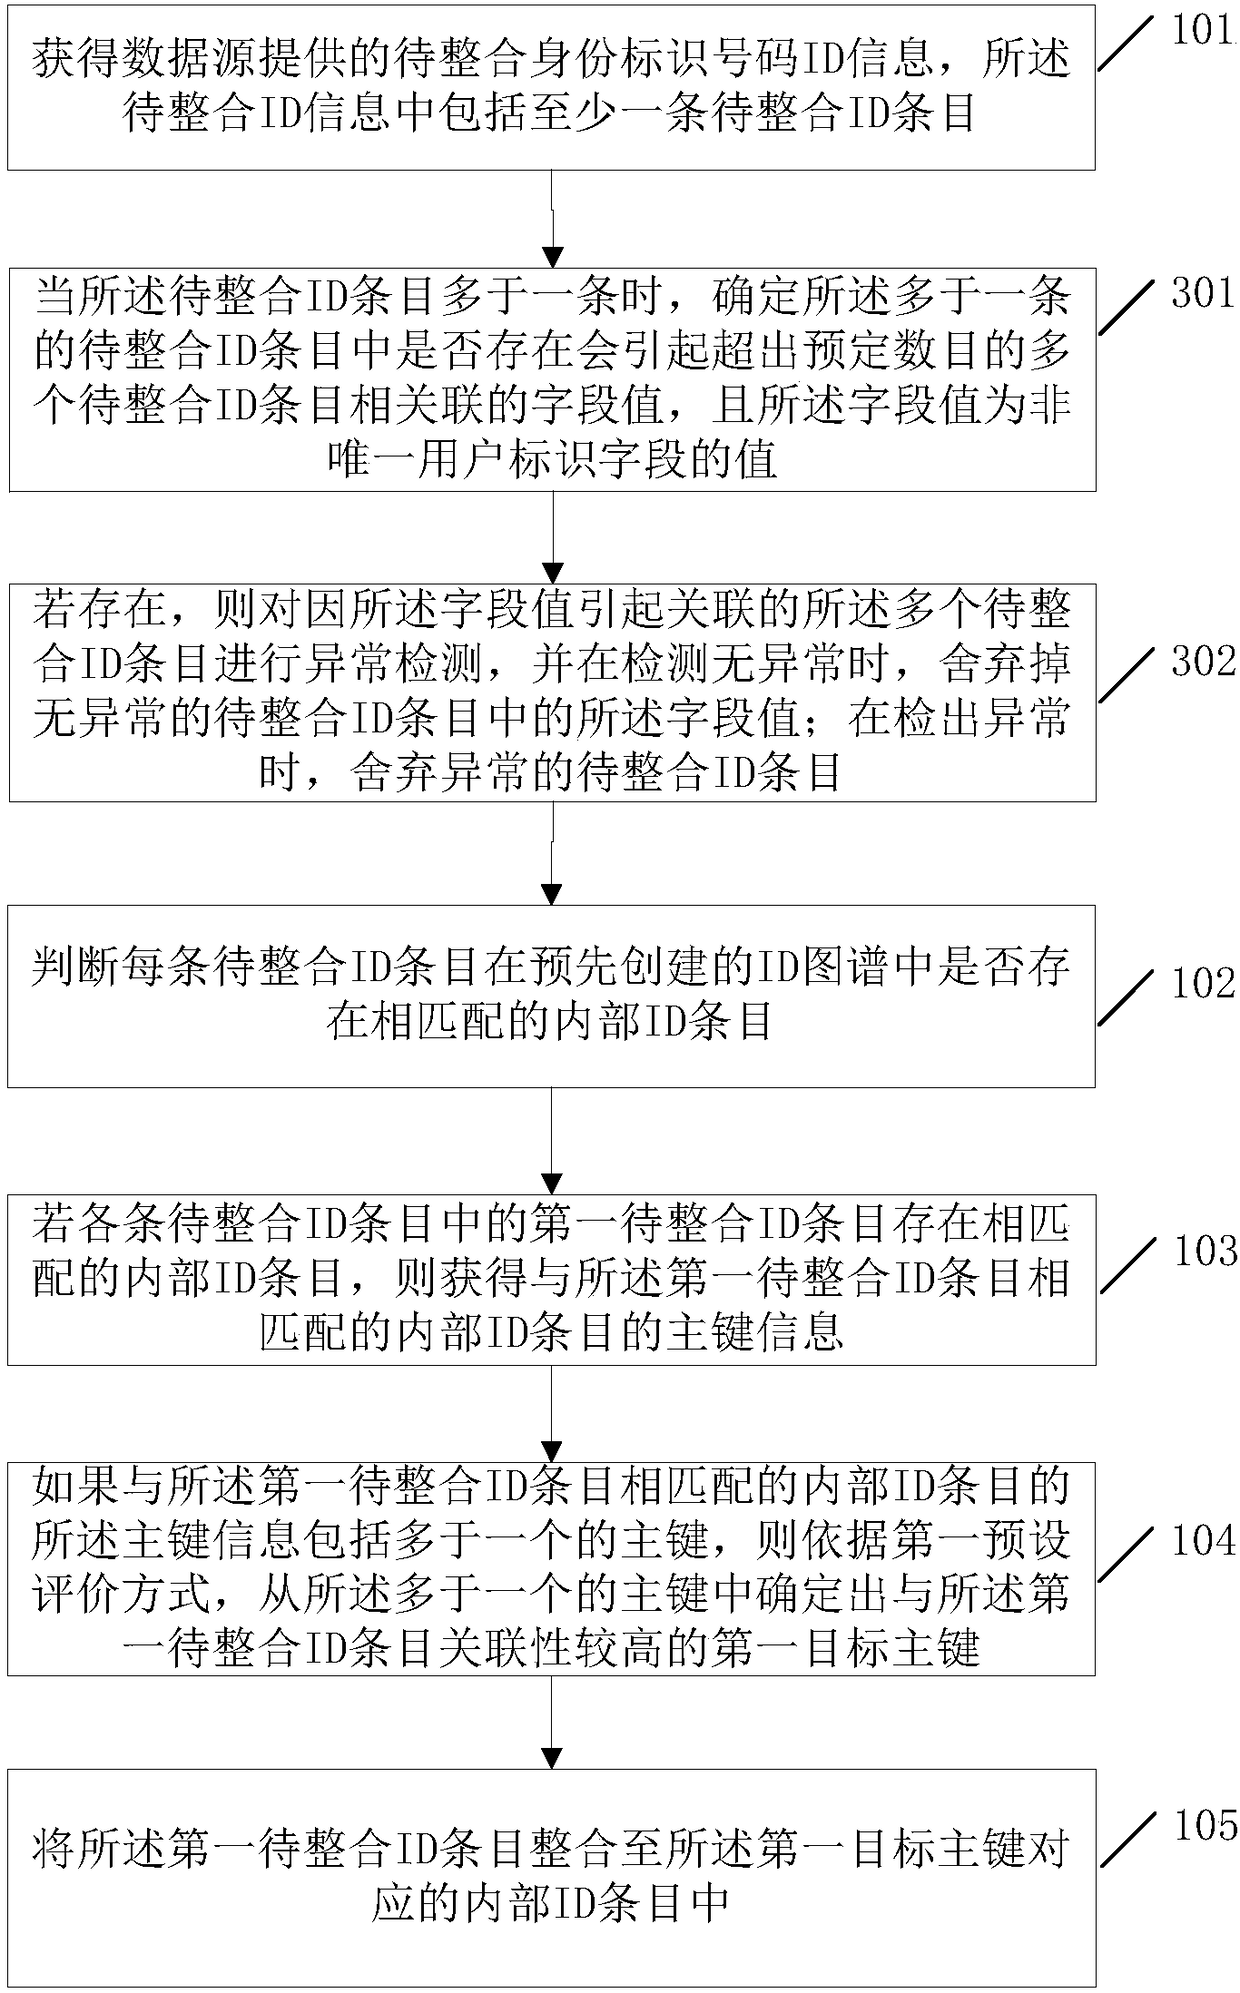 Multi-data-source user information integration method and device